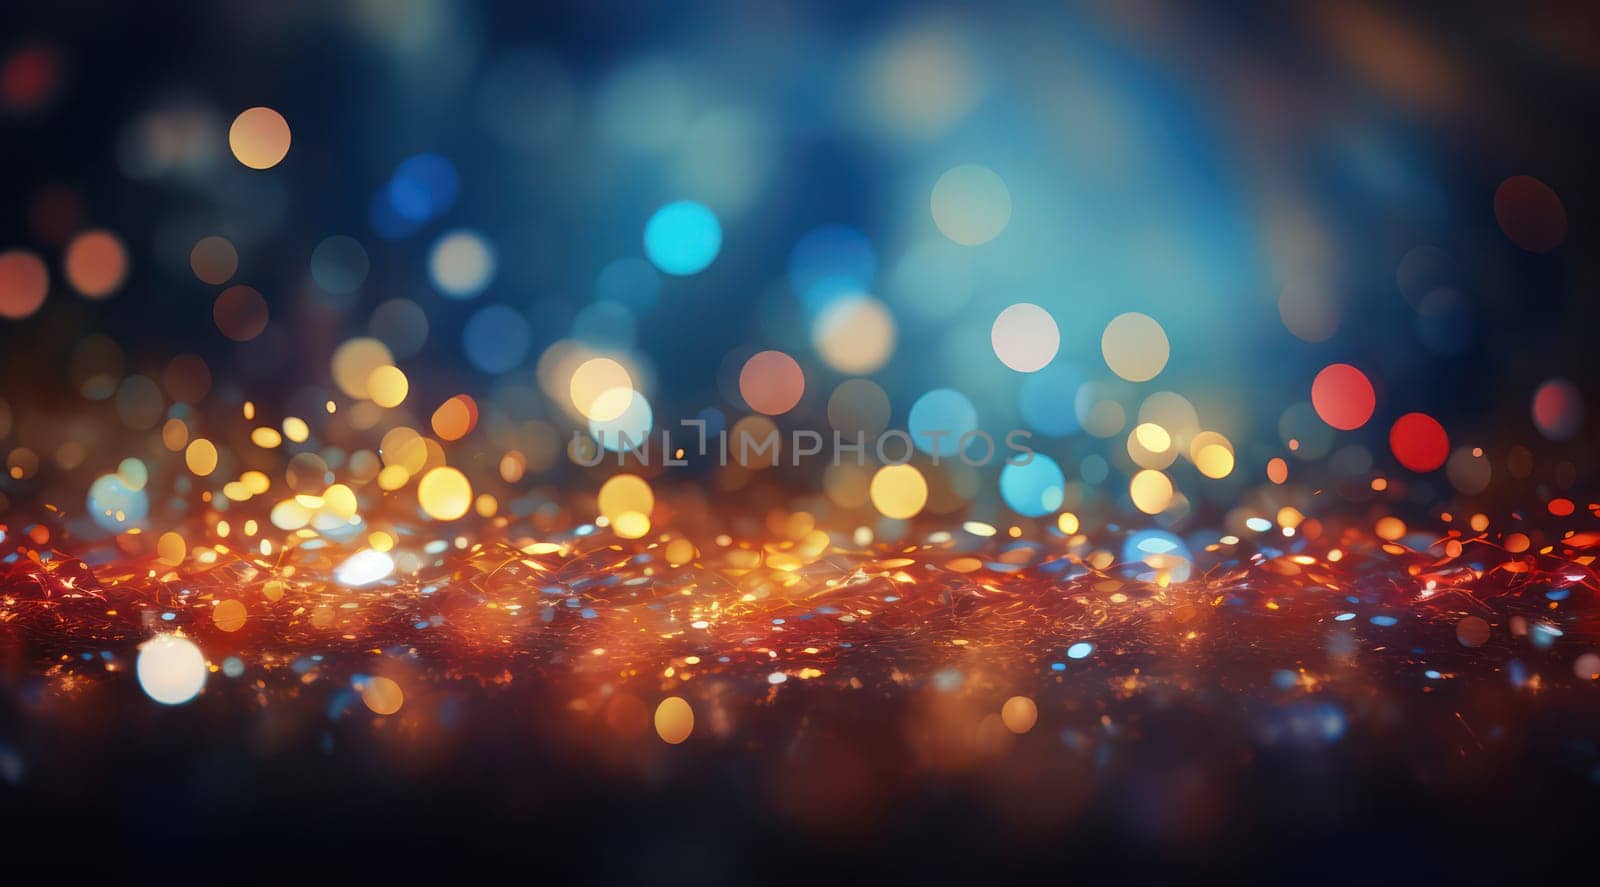 Glowing Christmas Lights: A Magical Bokeh of Shining Stars on a Blue Abstract Background. by Vichizh